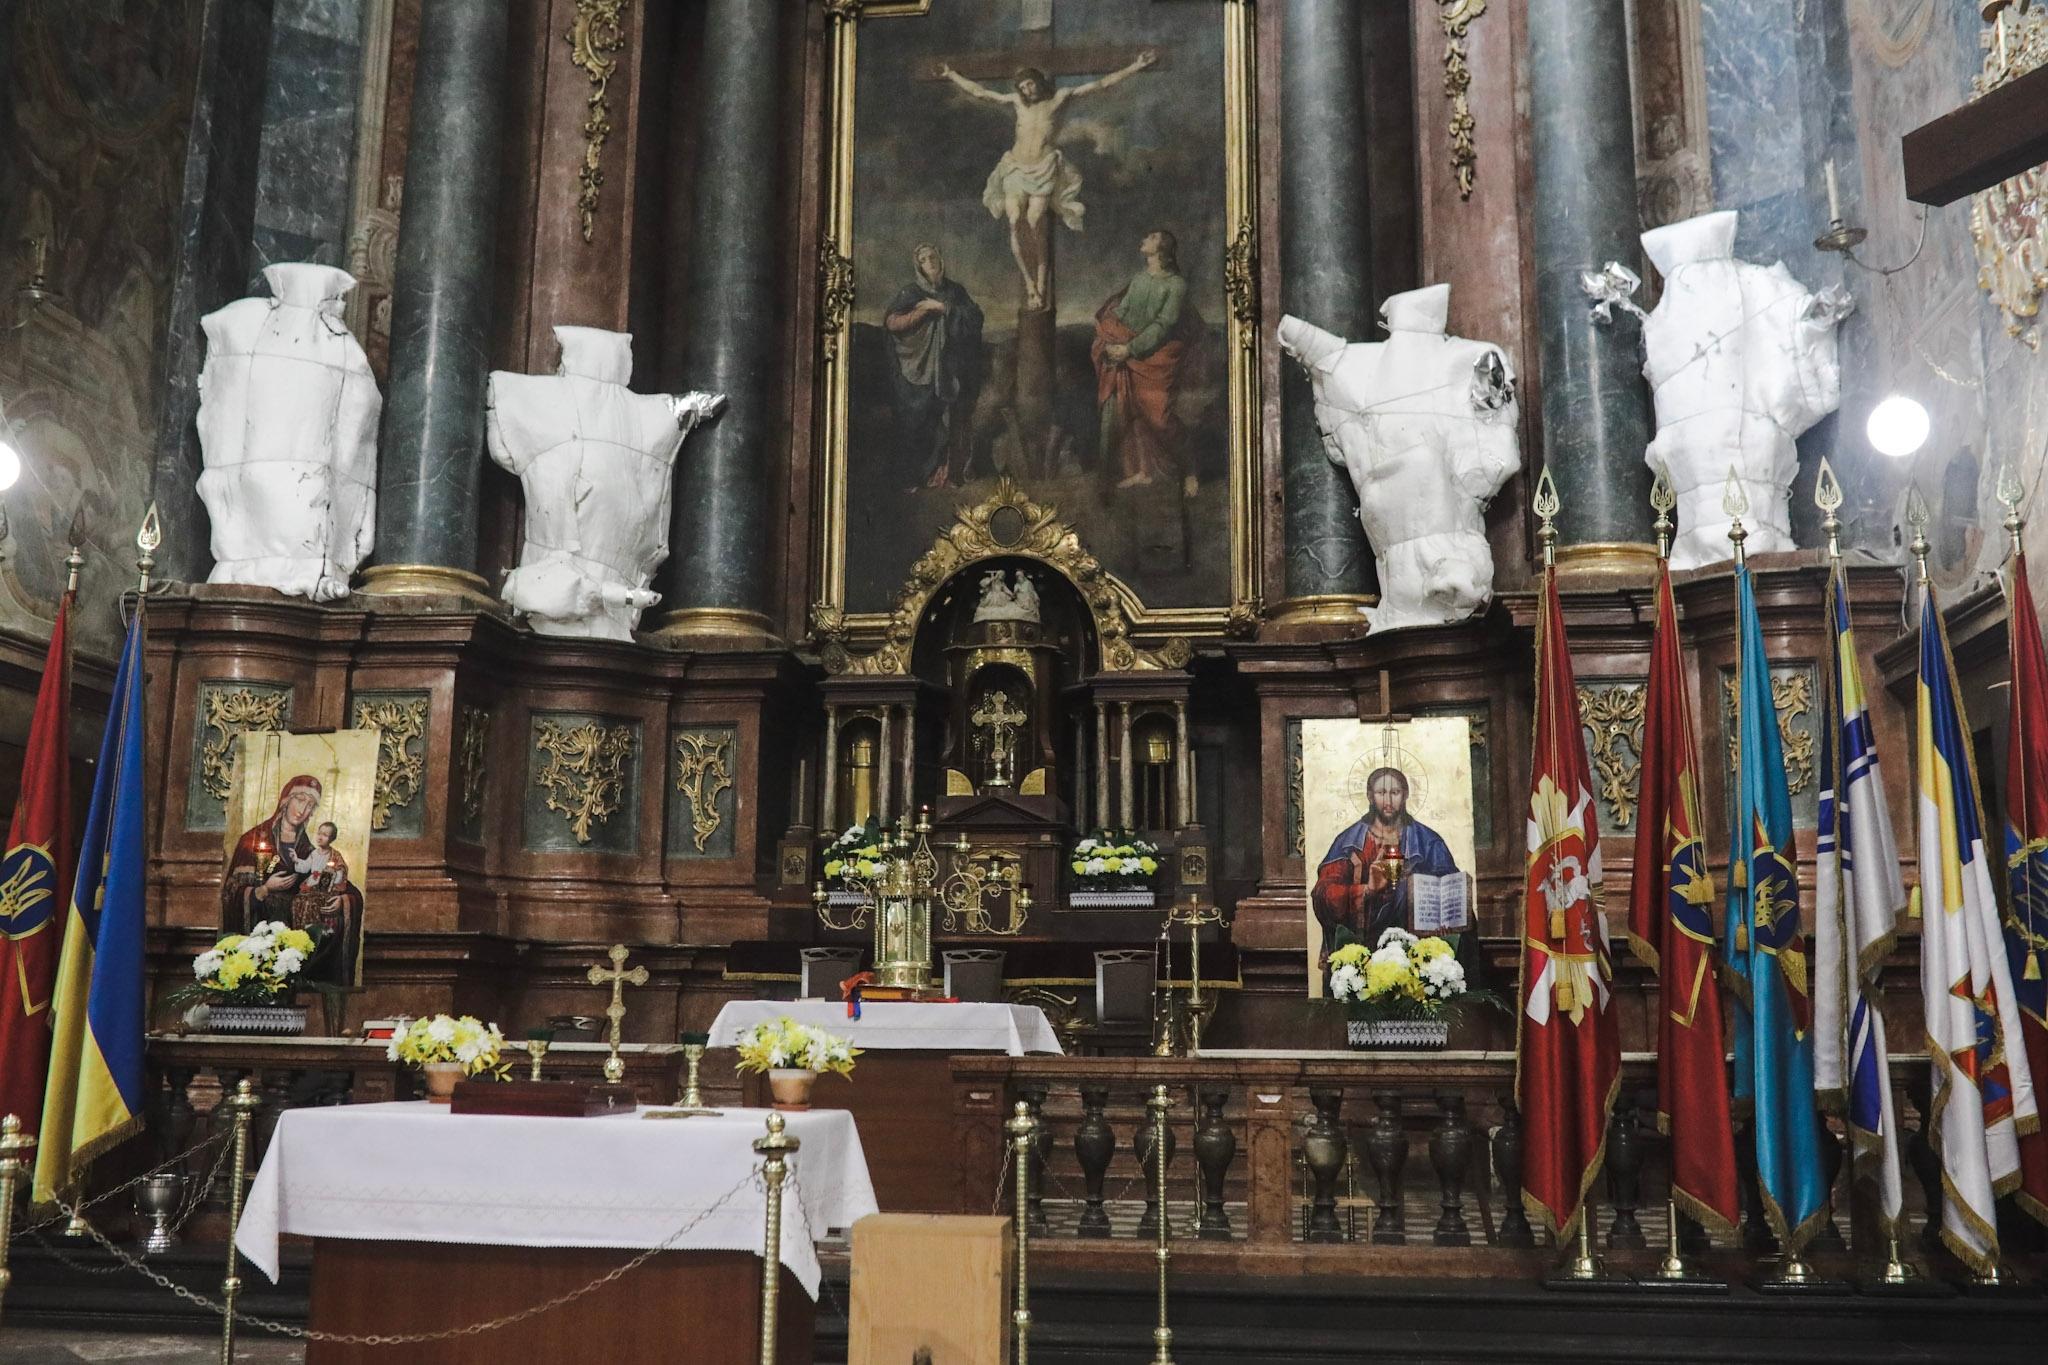 Anadolu/Getty - Easter gathering at Saints Peter and Paul Church in Lviv amid Russian attacks